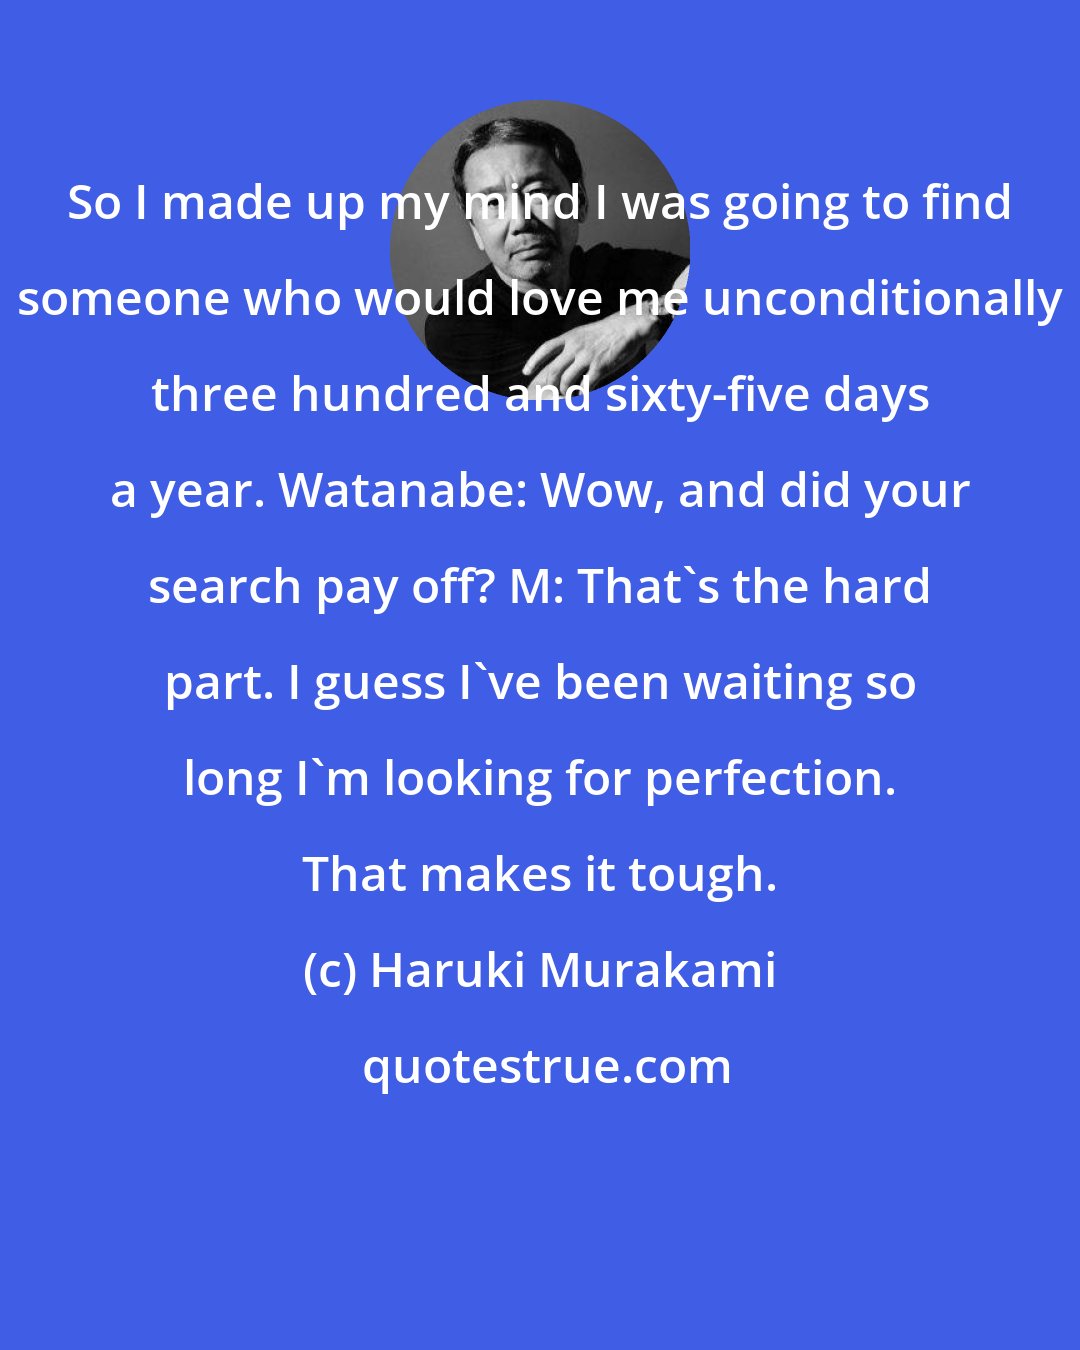 Haruki Murakami: So I made up my mind I was going to find someone who would love me unconditionally three hundred and sixty-five days a year. Watanabe: Wow, and did your search pay off? M: That's the hard part. I guess I've been waiting so long I'm looking for perfection. That makes it tough.